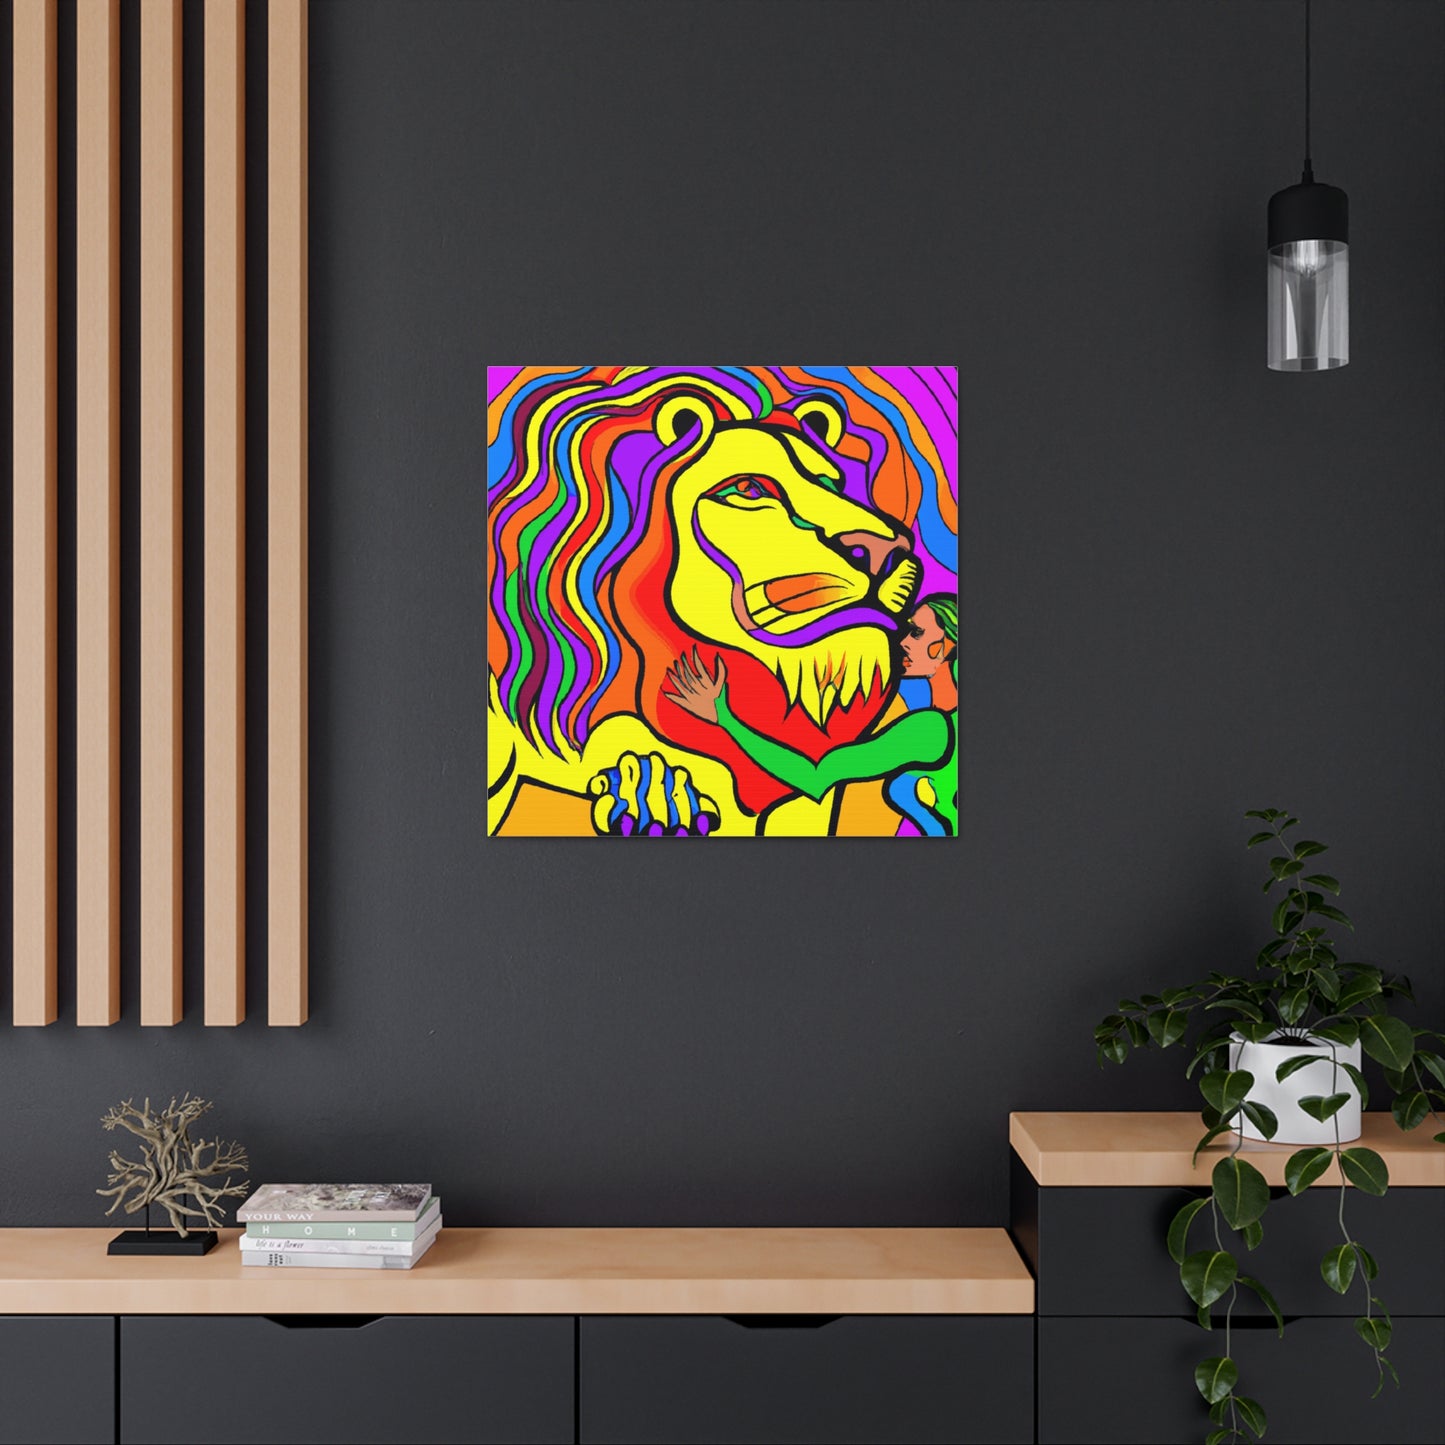 "Peter Max-Inspired Canvas Prints of Strength" by PenPencilArt